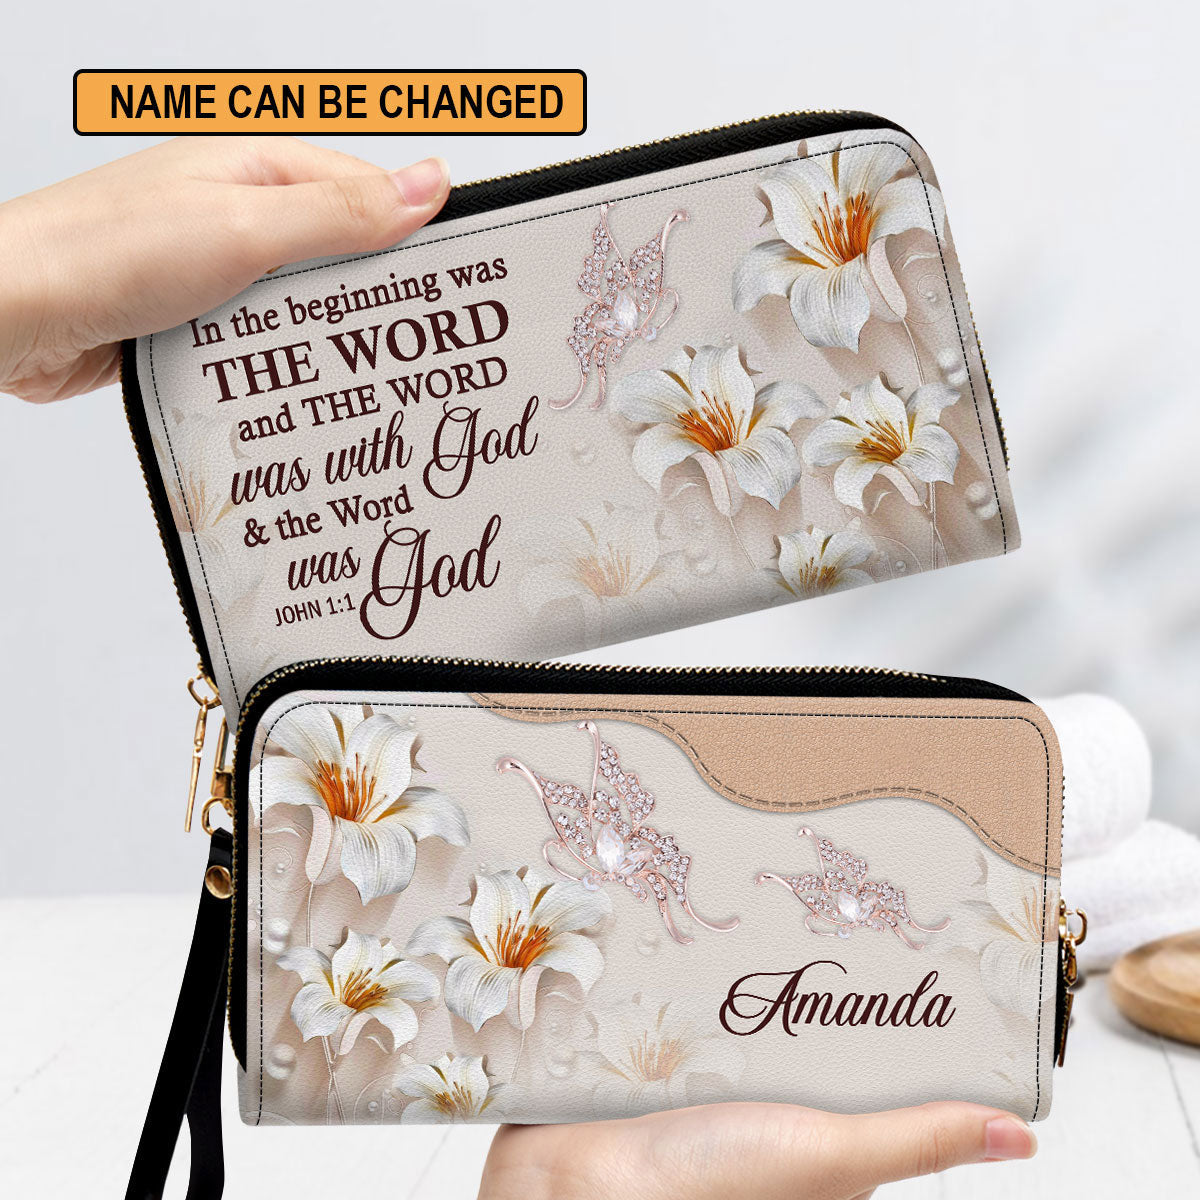 Lily John 1 1 Clutch Purse For Women - Personalized Name - Christian Gifts For Women